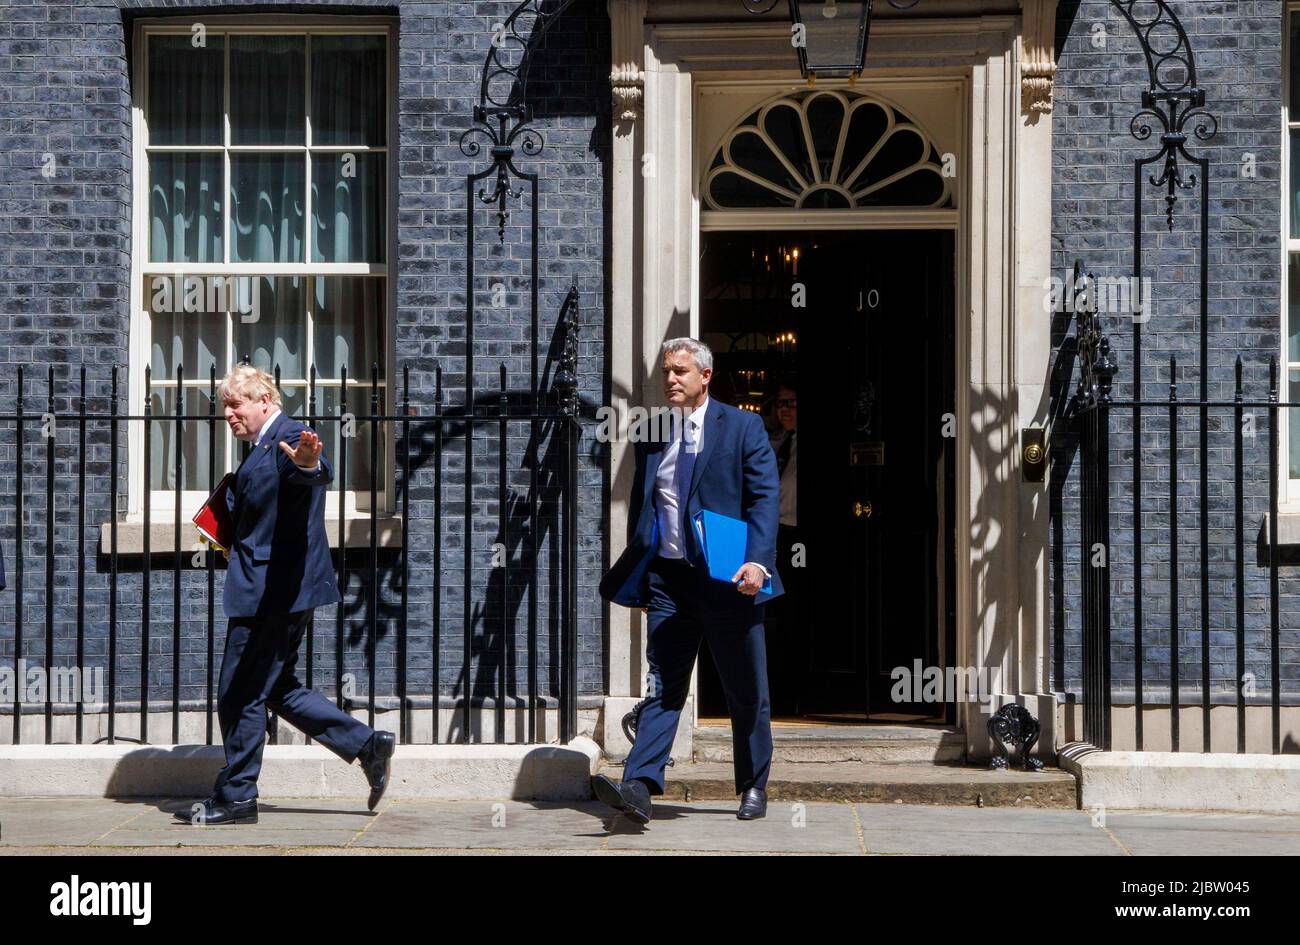 London, UK. 8th June, 2022. Prime Minister of the United Kingdom, Boris Johnson, leaves Number 10 in Downing Street with his Chief of Staff and Chancellor of the Duchy of Lancaster, Stephen Barclay. He heads to the House of Commons for Prime Ministers Questions. He faces interrogation by Sir keir Starmer over the recent Vote of No confidence in whiuch 148 of his own party members, voted against him. This is 41% of his own Party. Credit: Karl Black/Alamy Live News Stock Photo